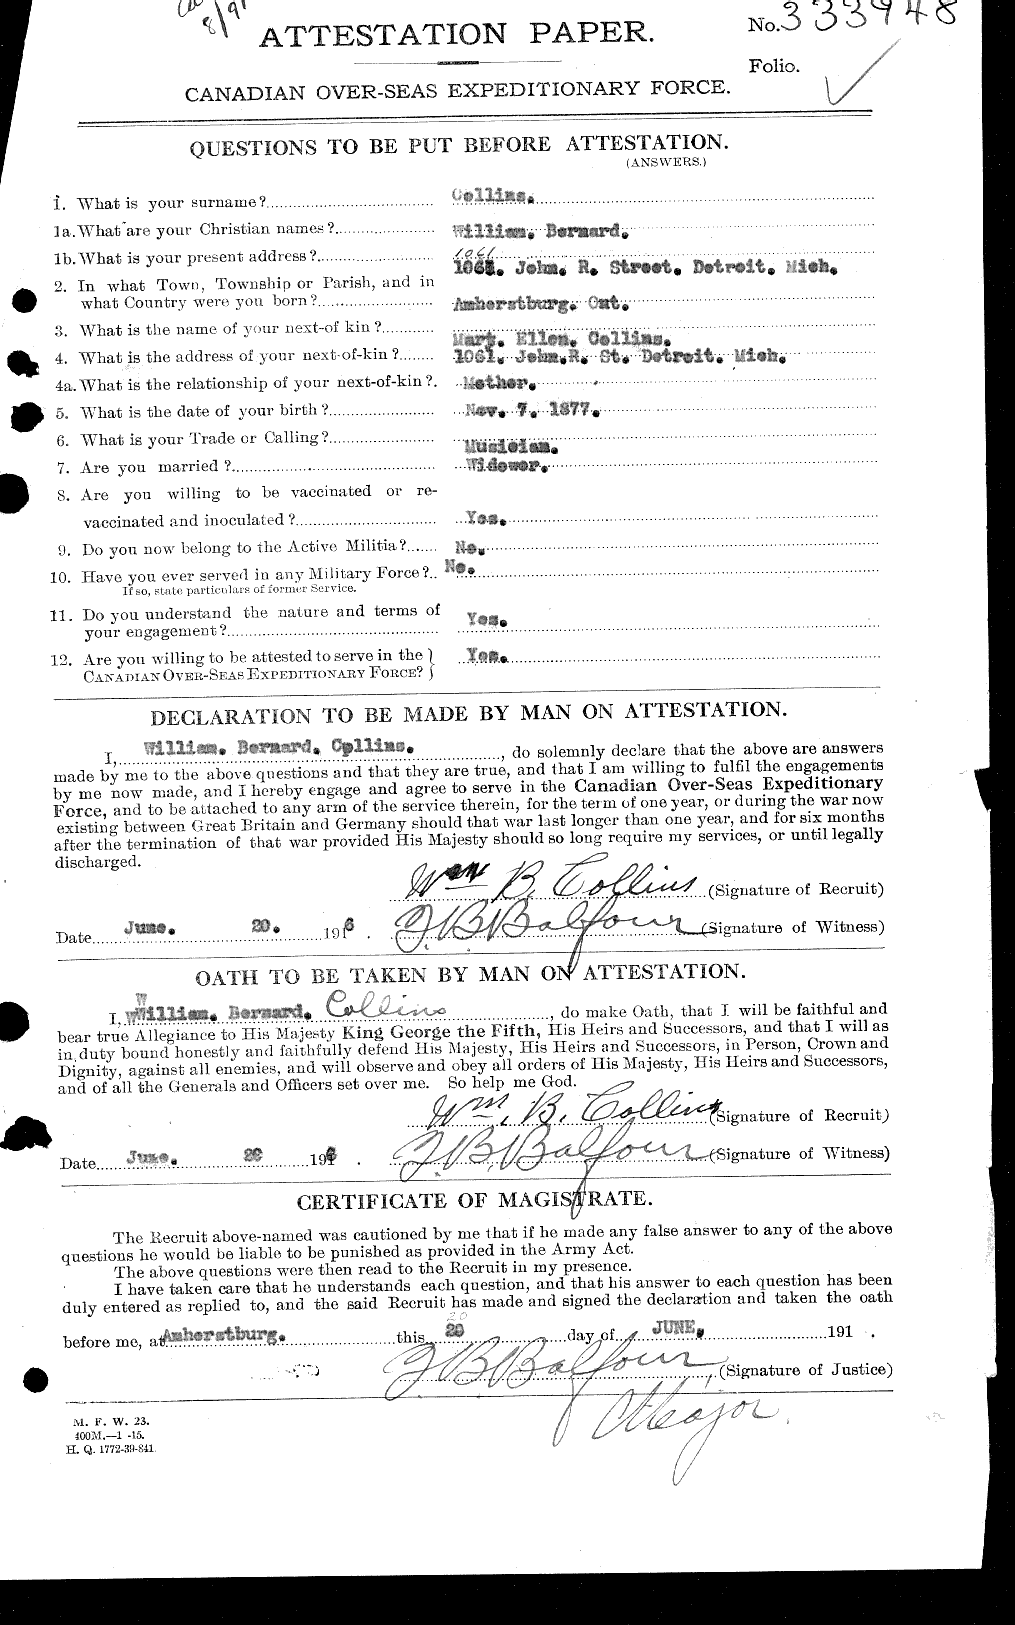 Personnel Records of the First World War - CEF 034591a